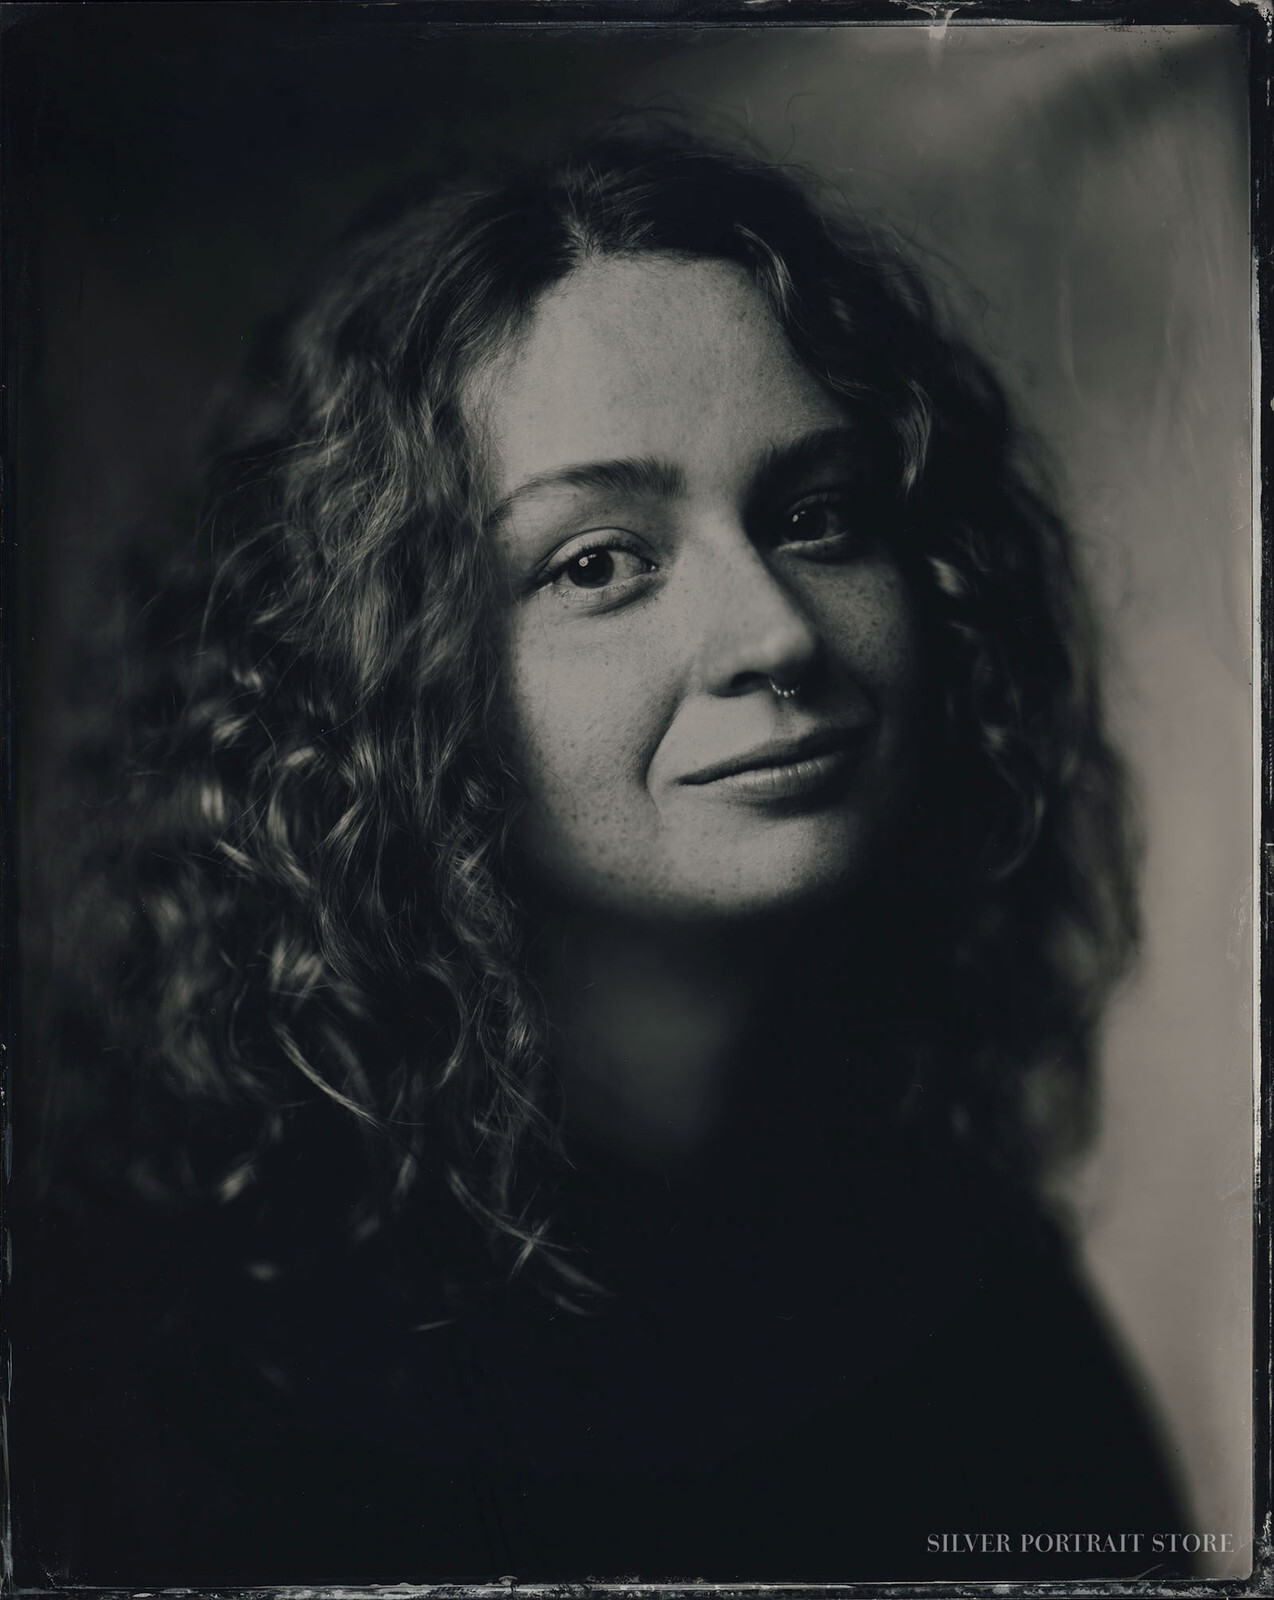 Sarah-Silver Portrait Store-scan from Wet plate collodion-Tintype 20 x 25 cm.